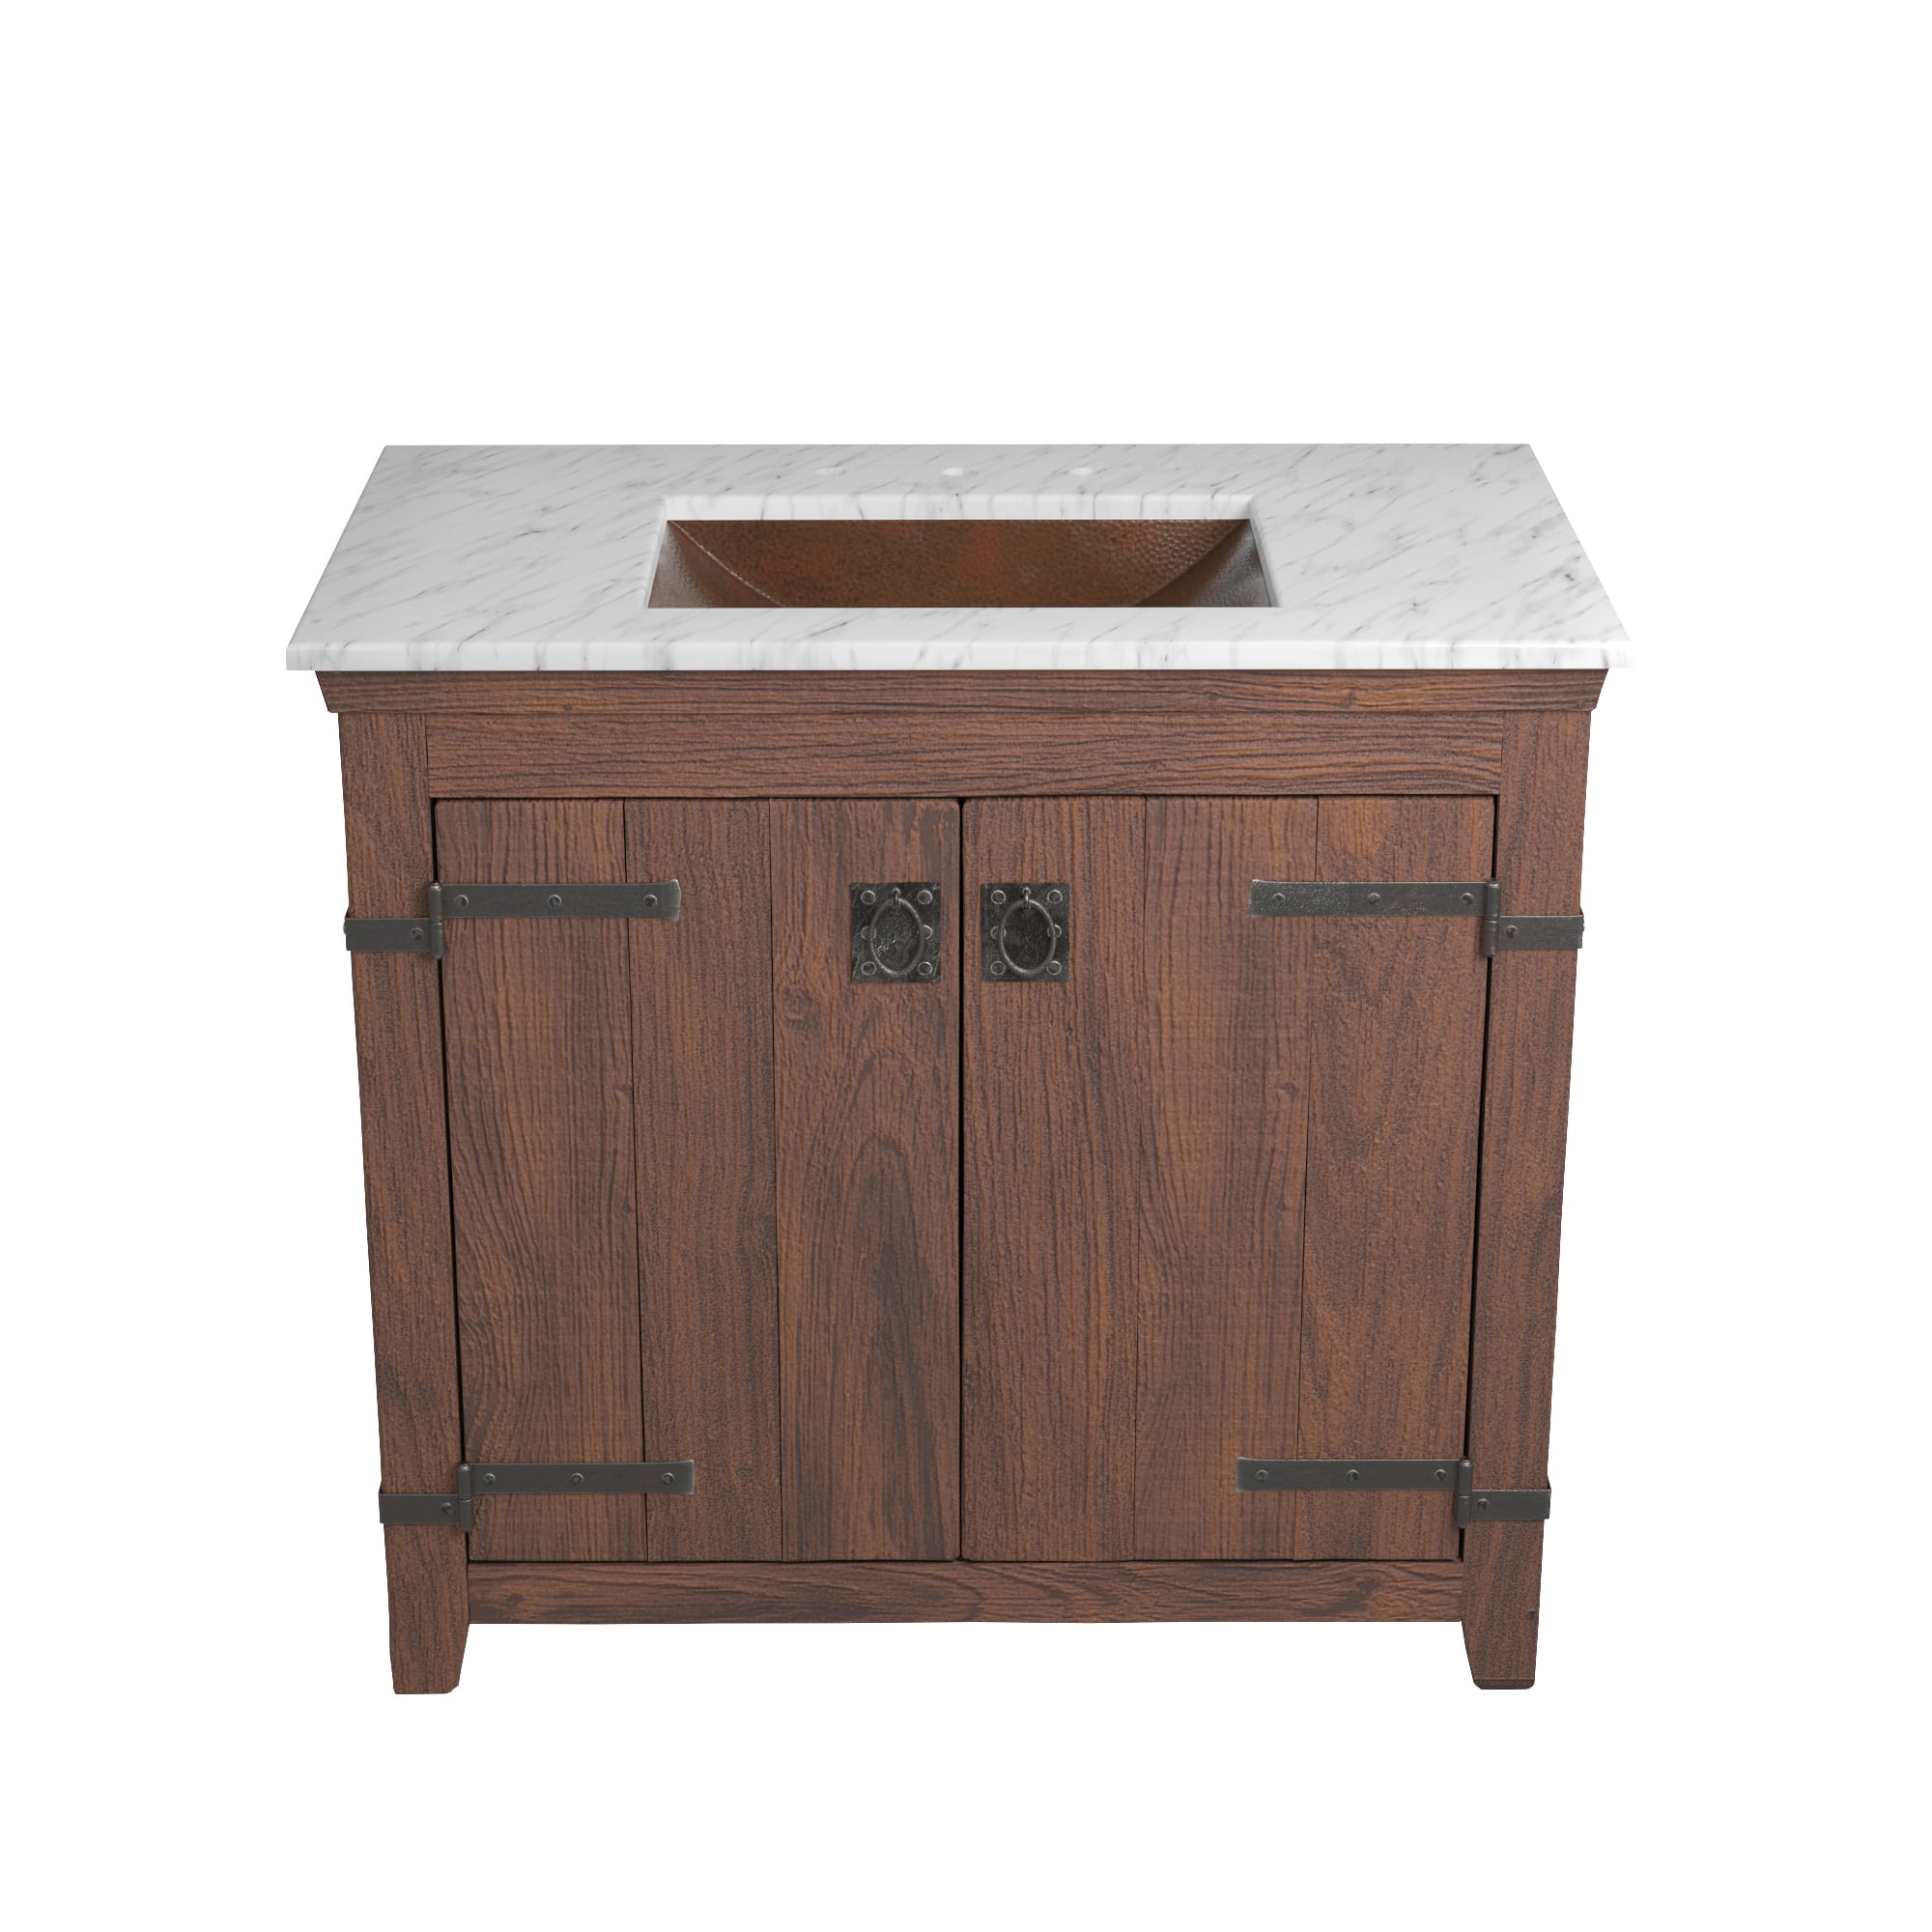 Native Trails 36" Americana Vanity in Chestnut with Carrara Marble Top and Avila in Antique, 8" Widespread Faucet Holes, BND36-VB-CT-CP-004